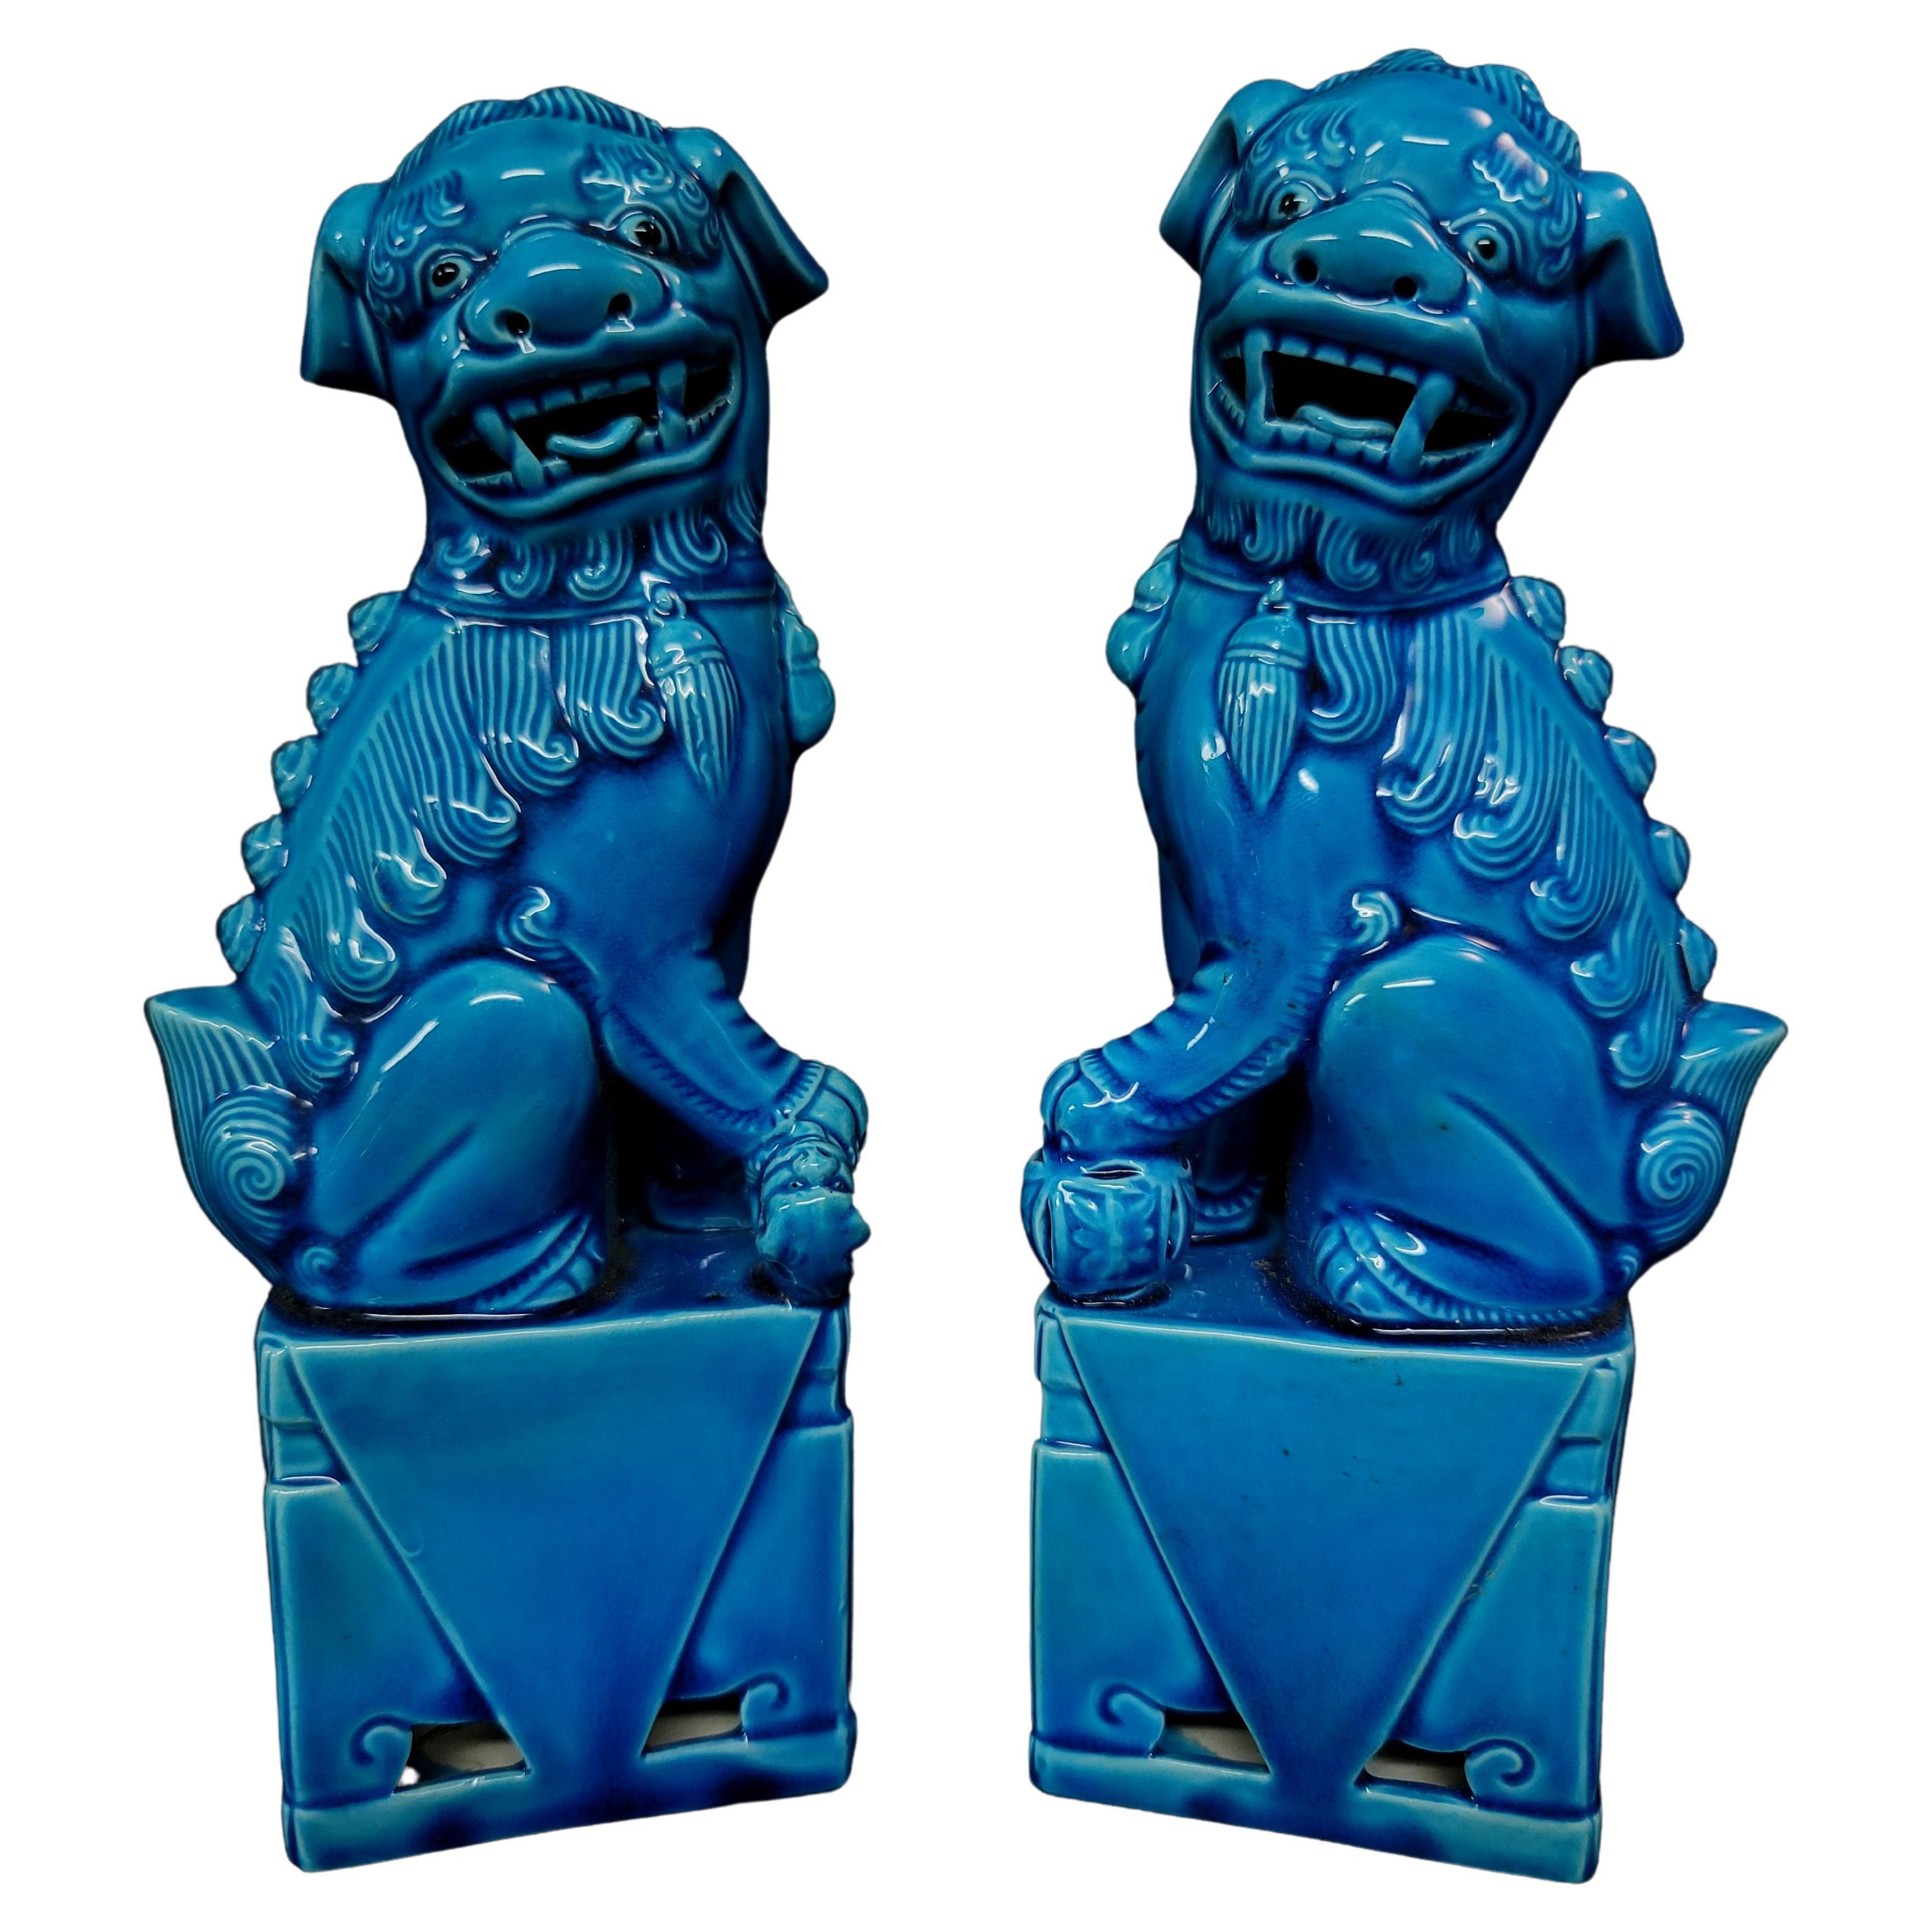  Pair of Chinese Turquoise Glazed Porcelain Mounted Foo Dogs